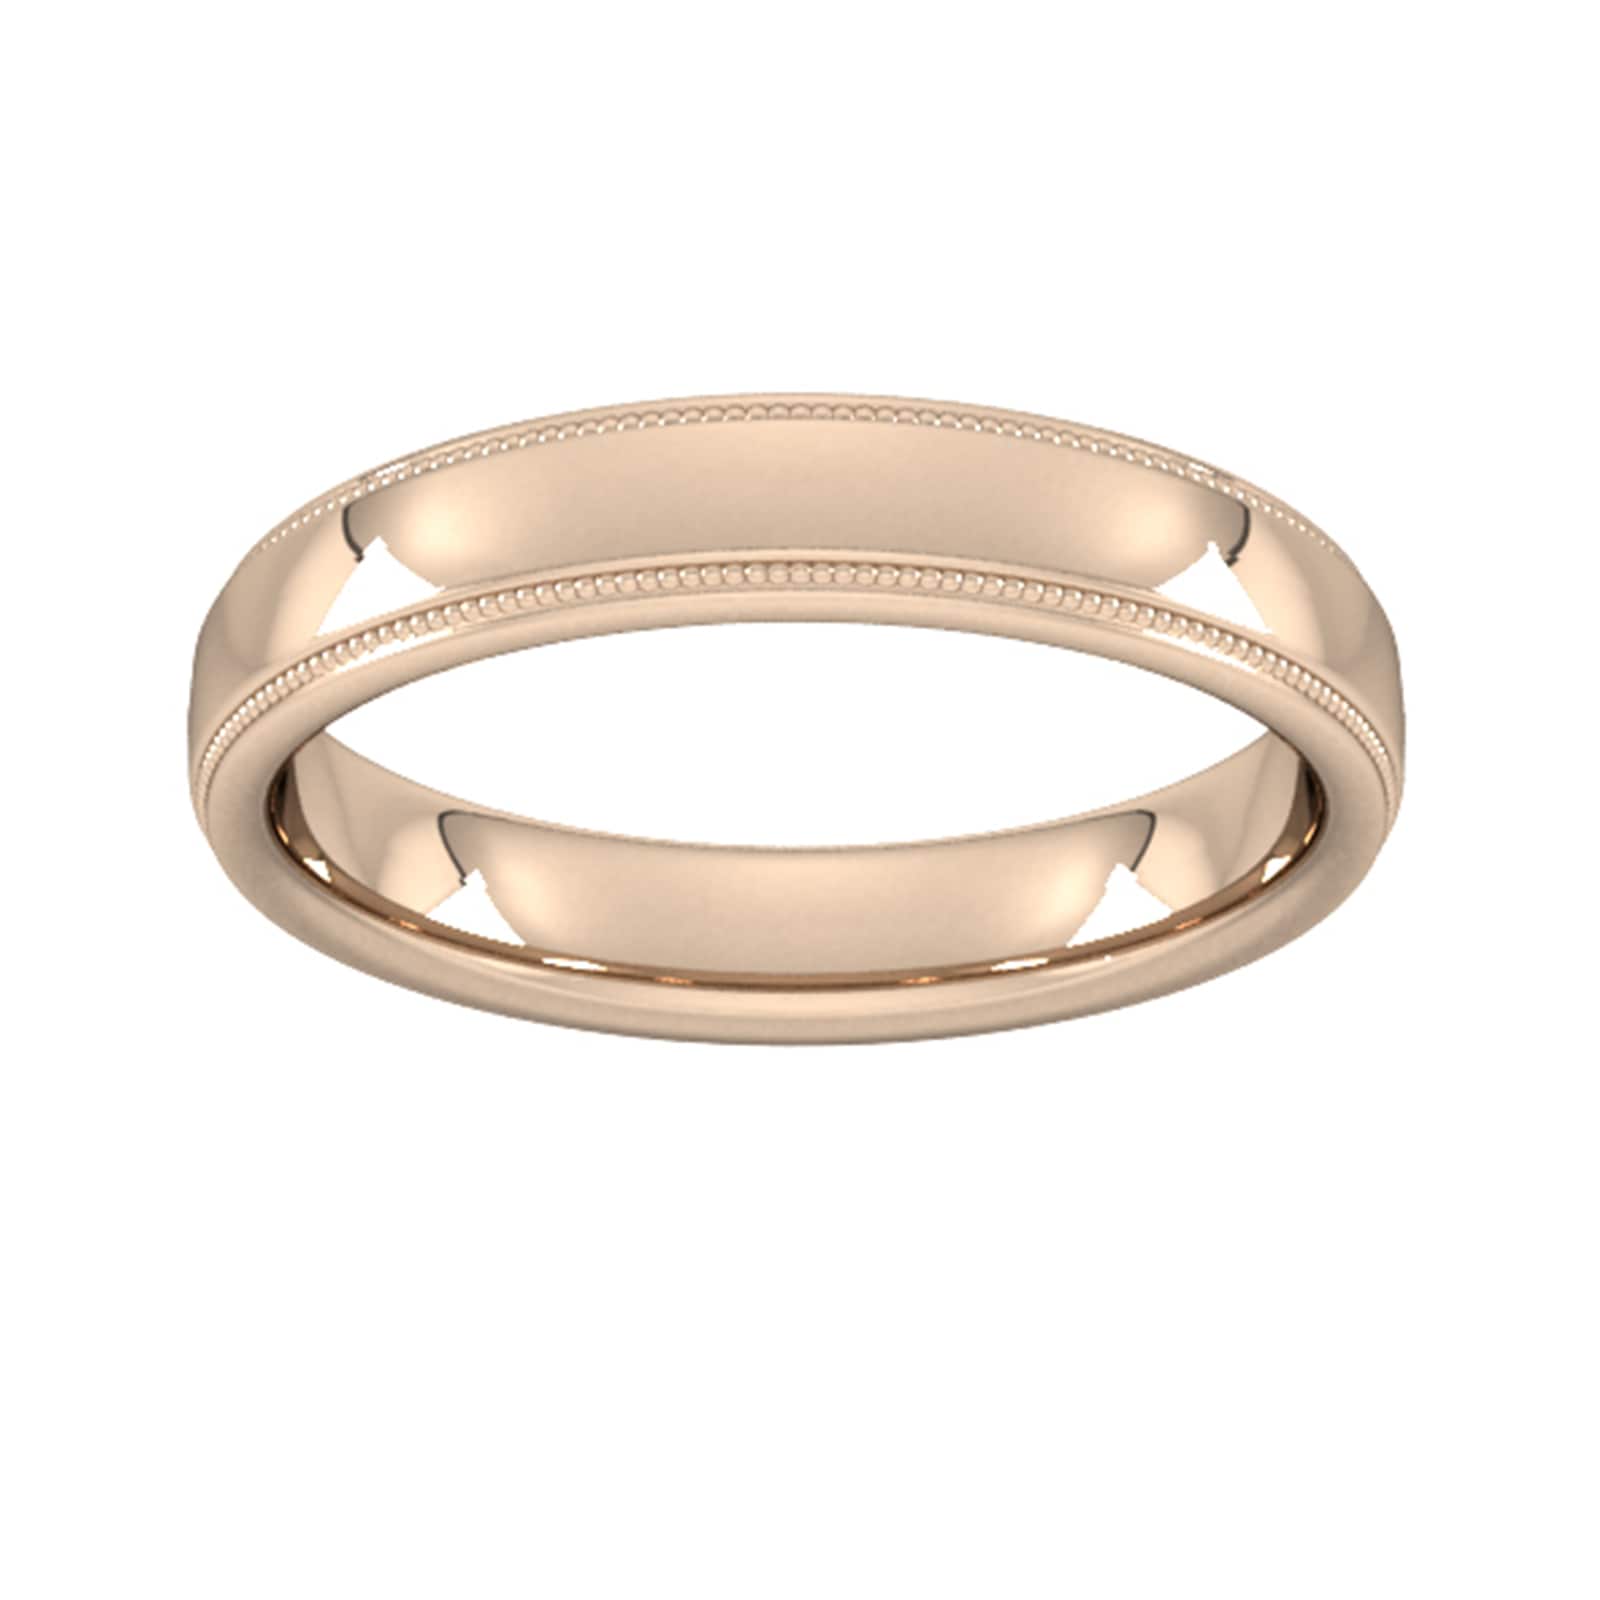 4mm Traditional Court Standard Milgrain Edge Wedding Ring In 9 Carat Rose Gold - Ring Size O